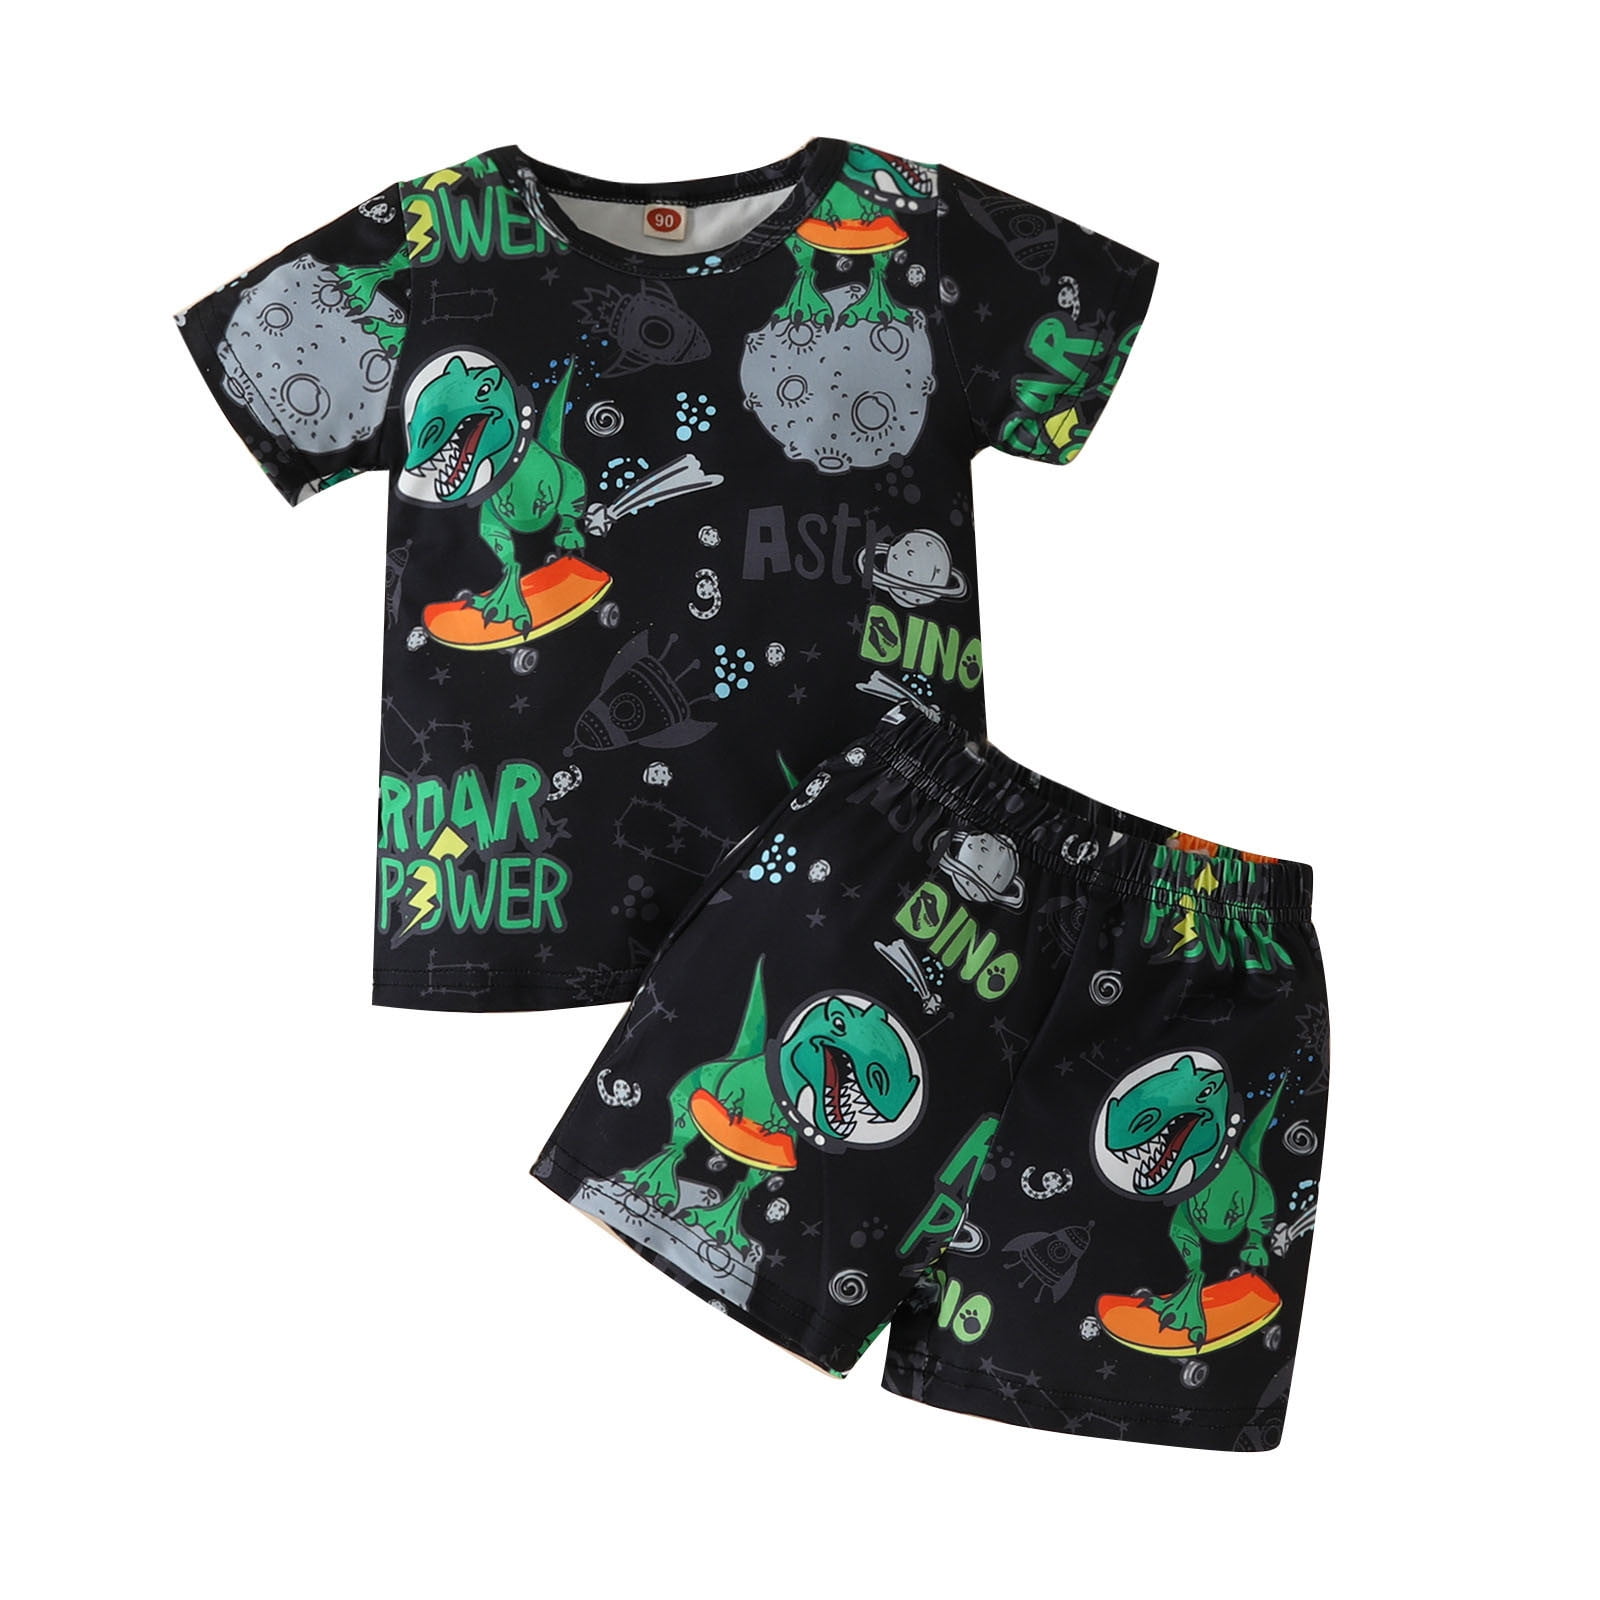 ASFGIMUJ Toddler Boys Clothes Baby Boy Outfit Summer Short Sleeve ...